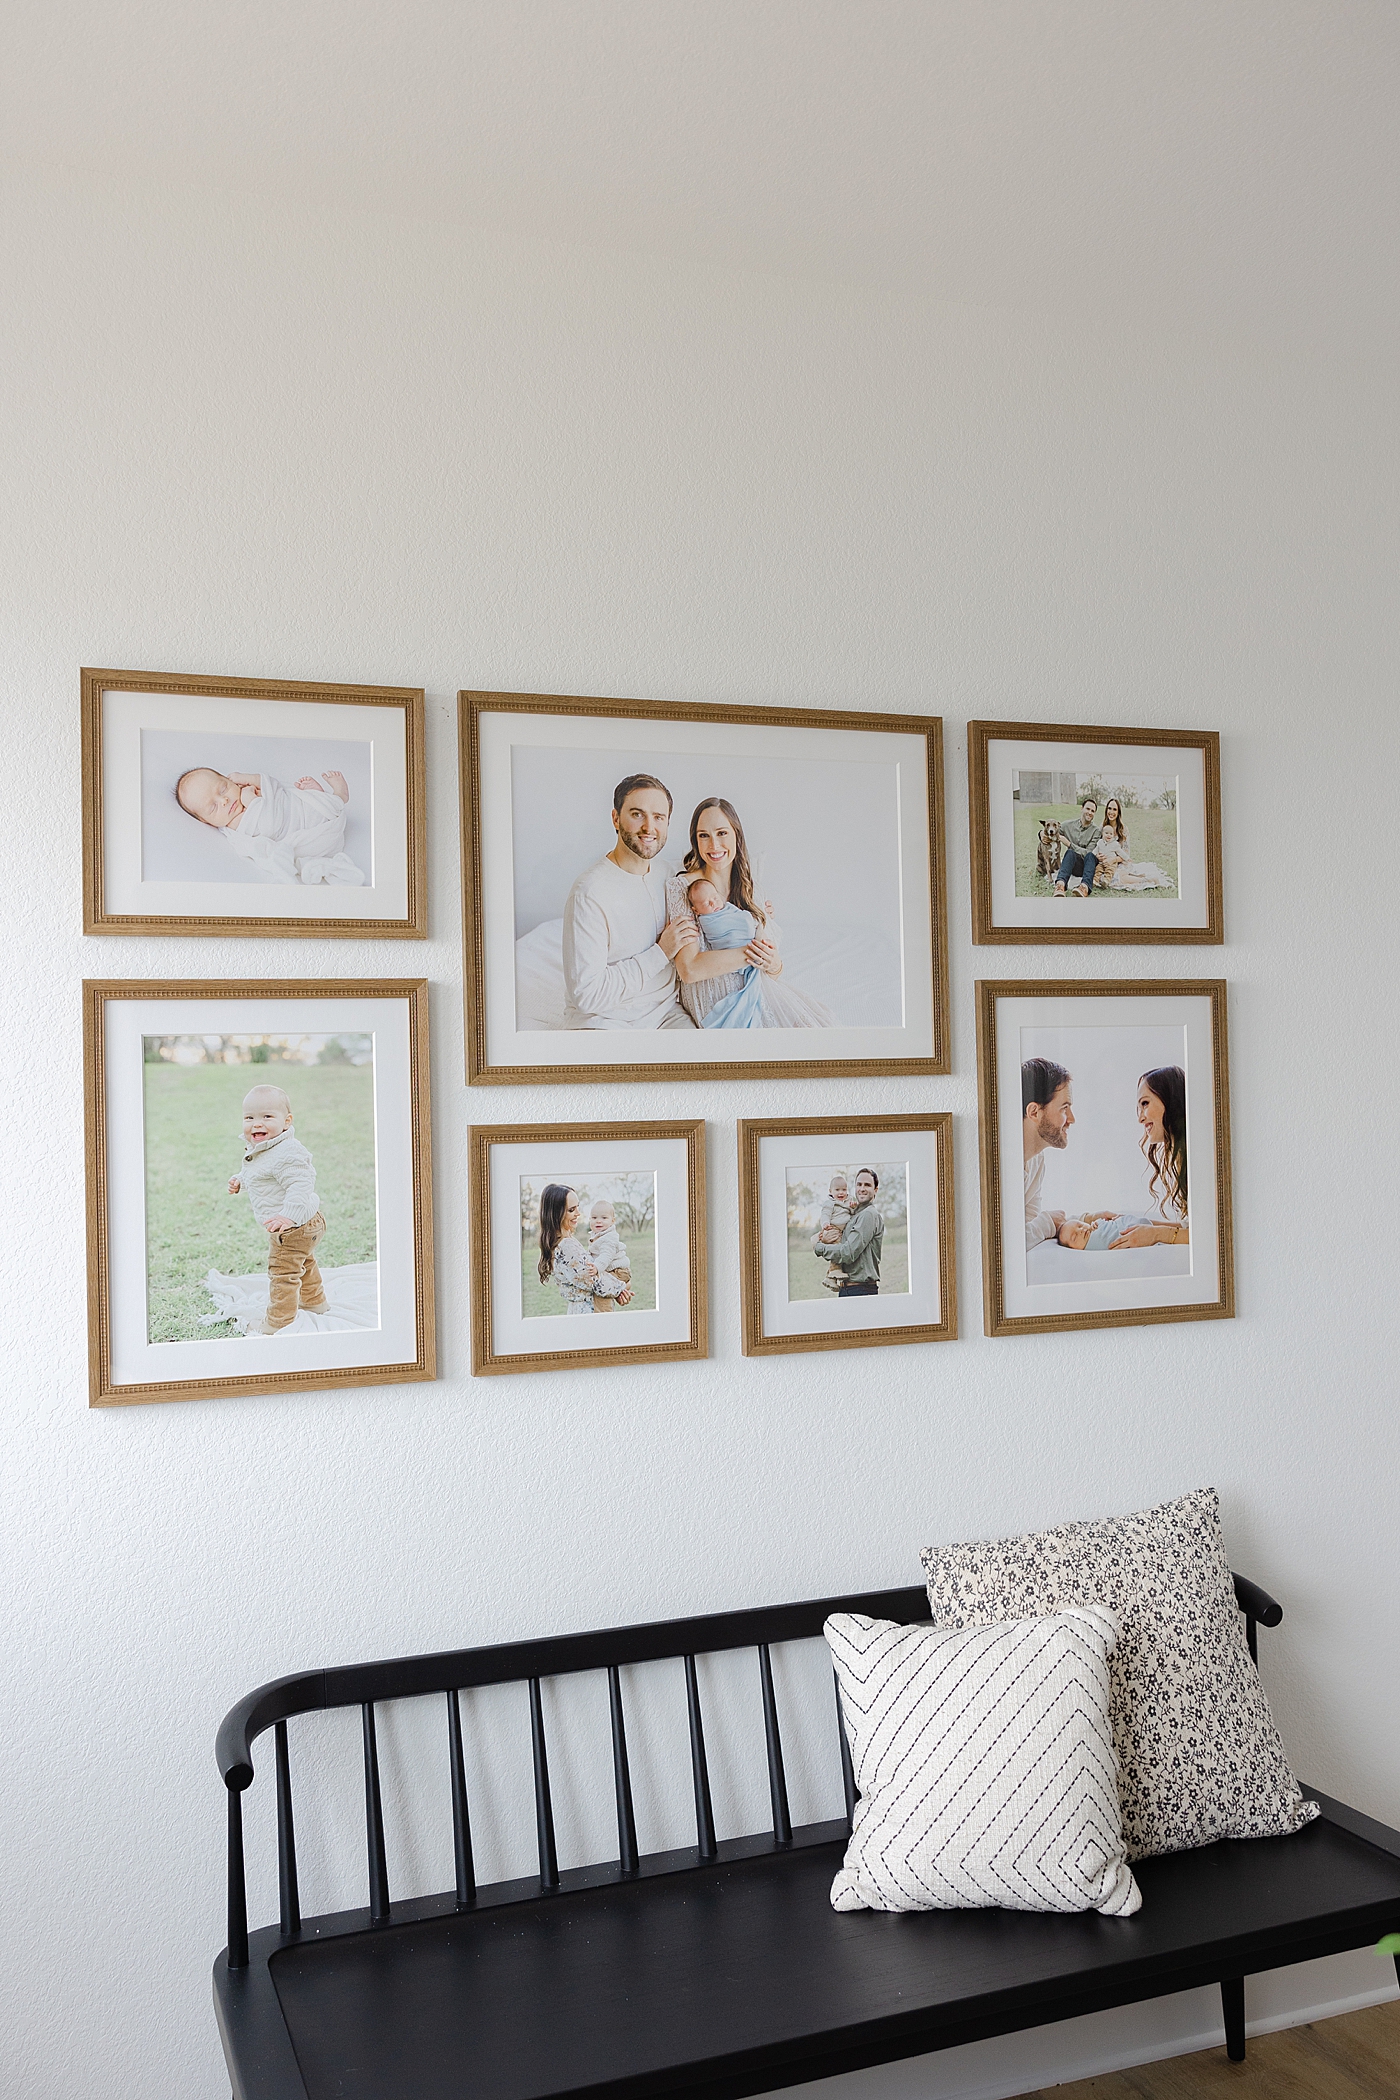 Gallery wall of family's images from their sessions | Image by Sana Ahmed Photography